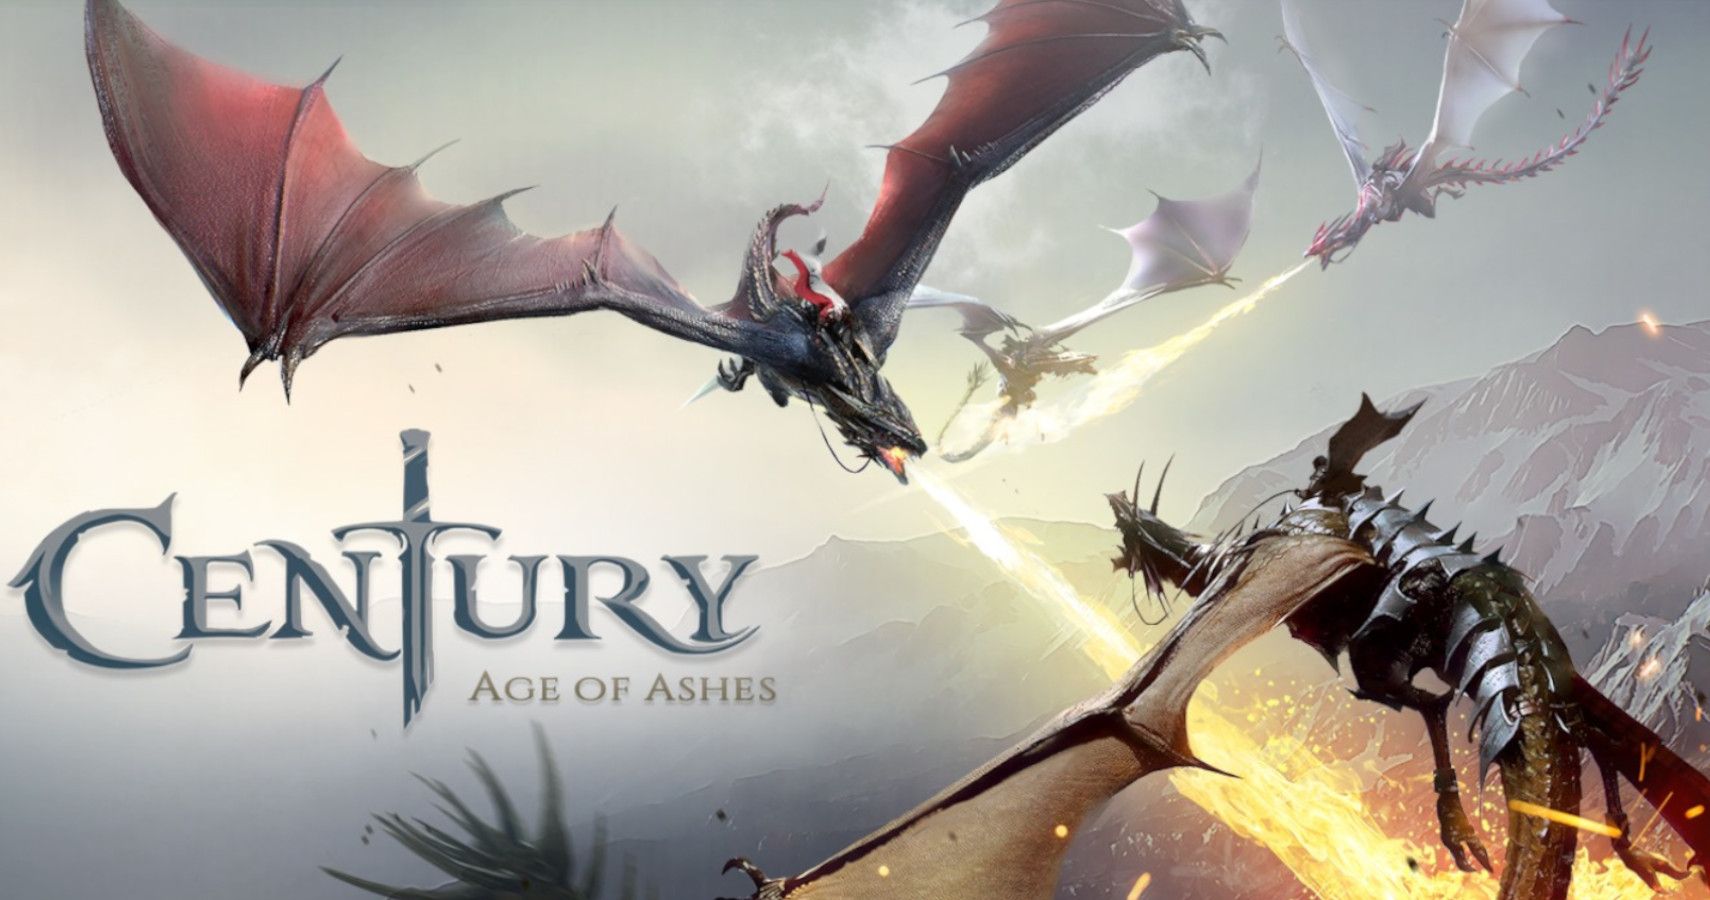 century: age of ashes dragons list